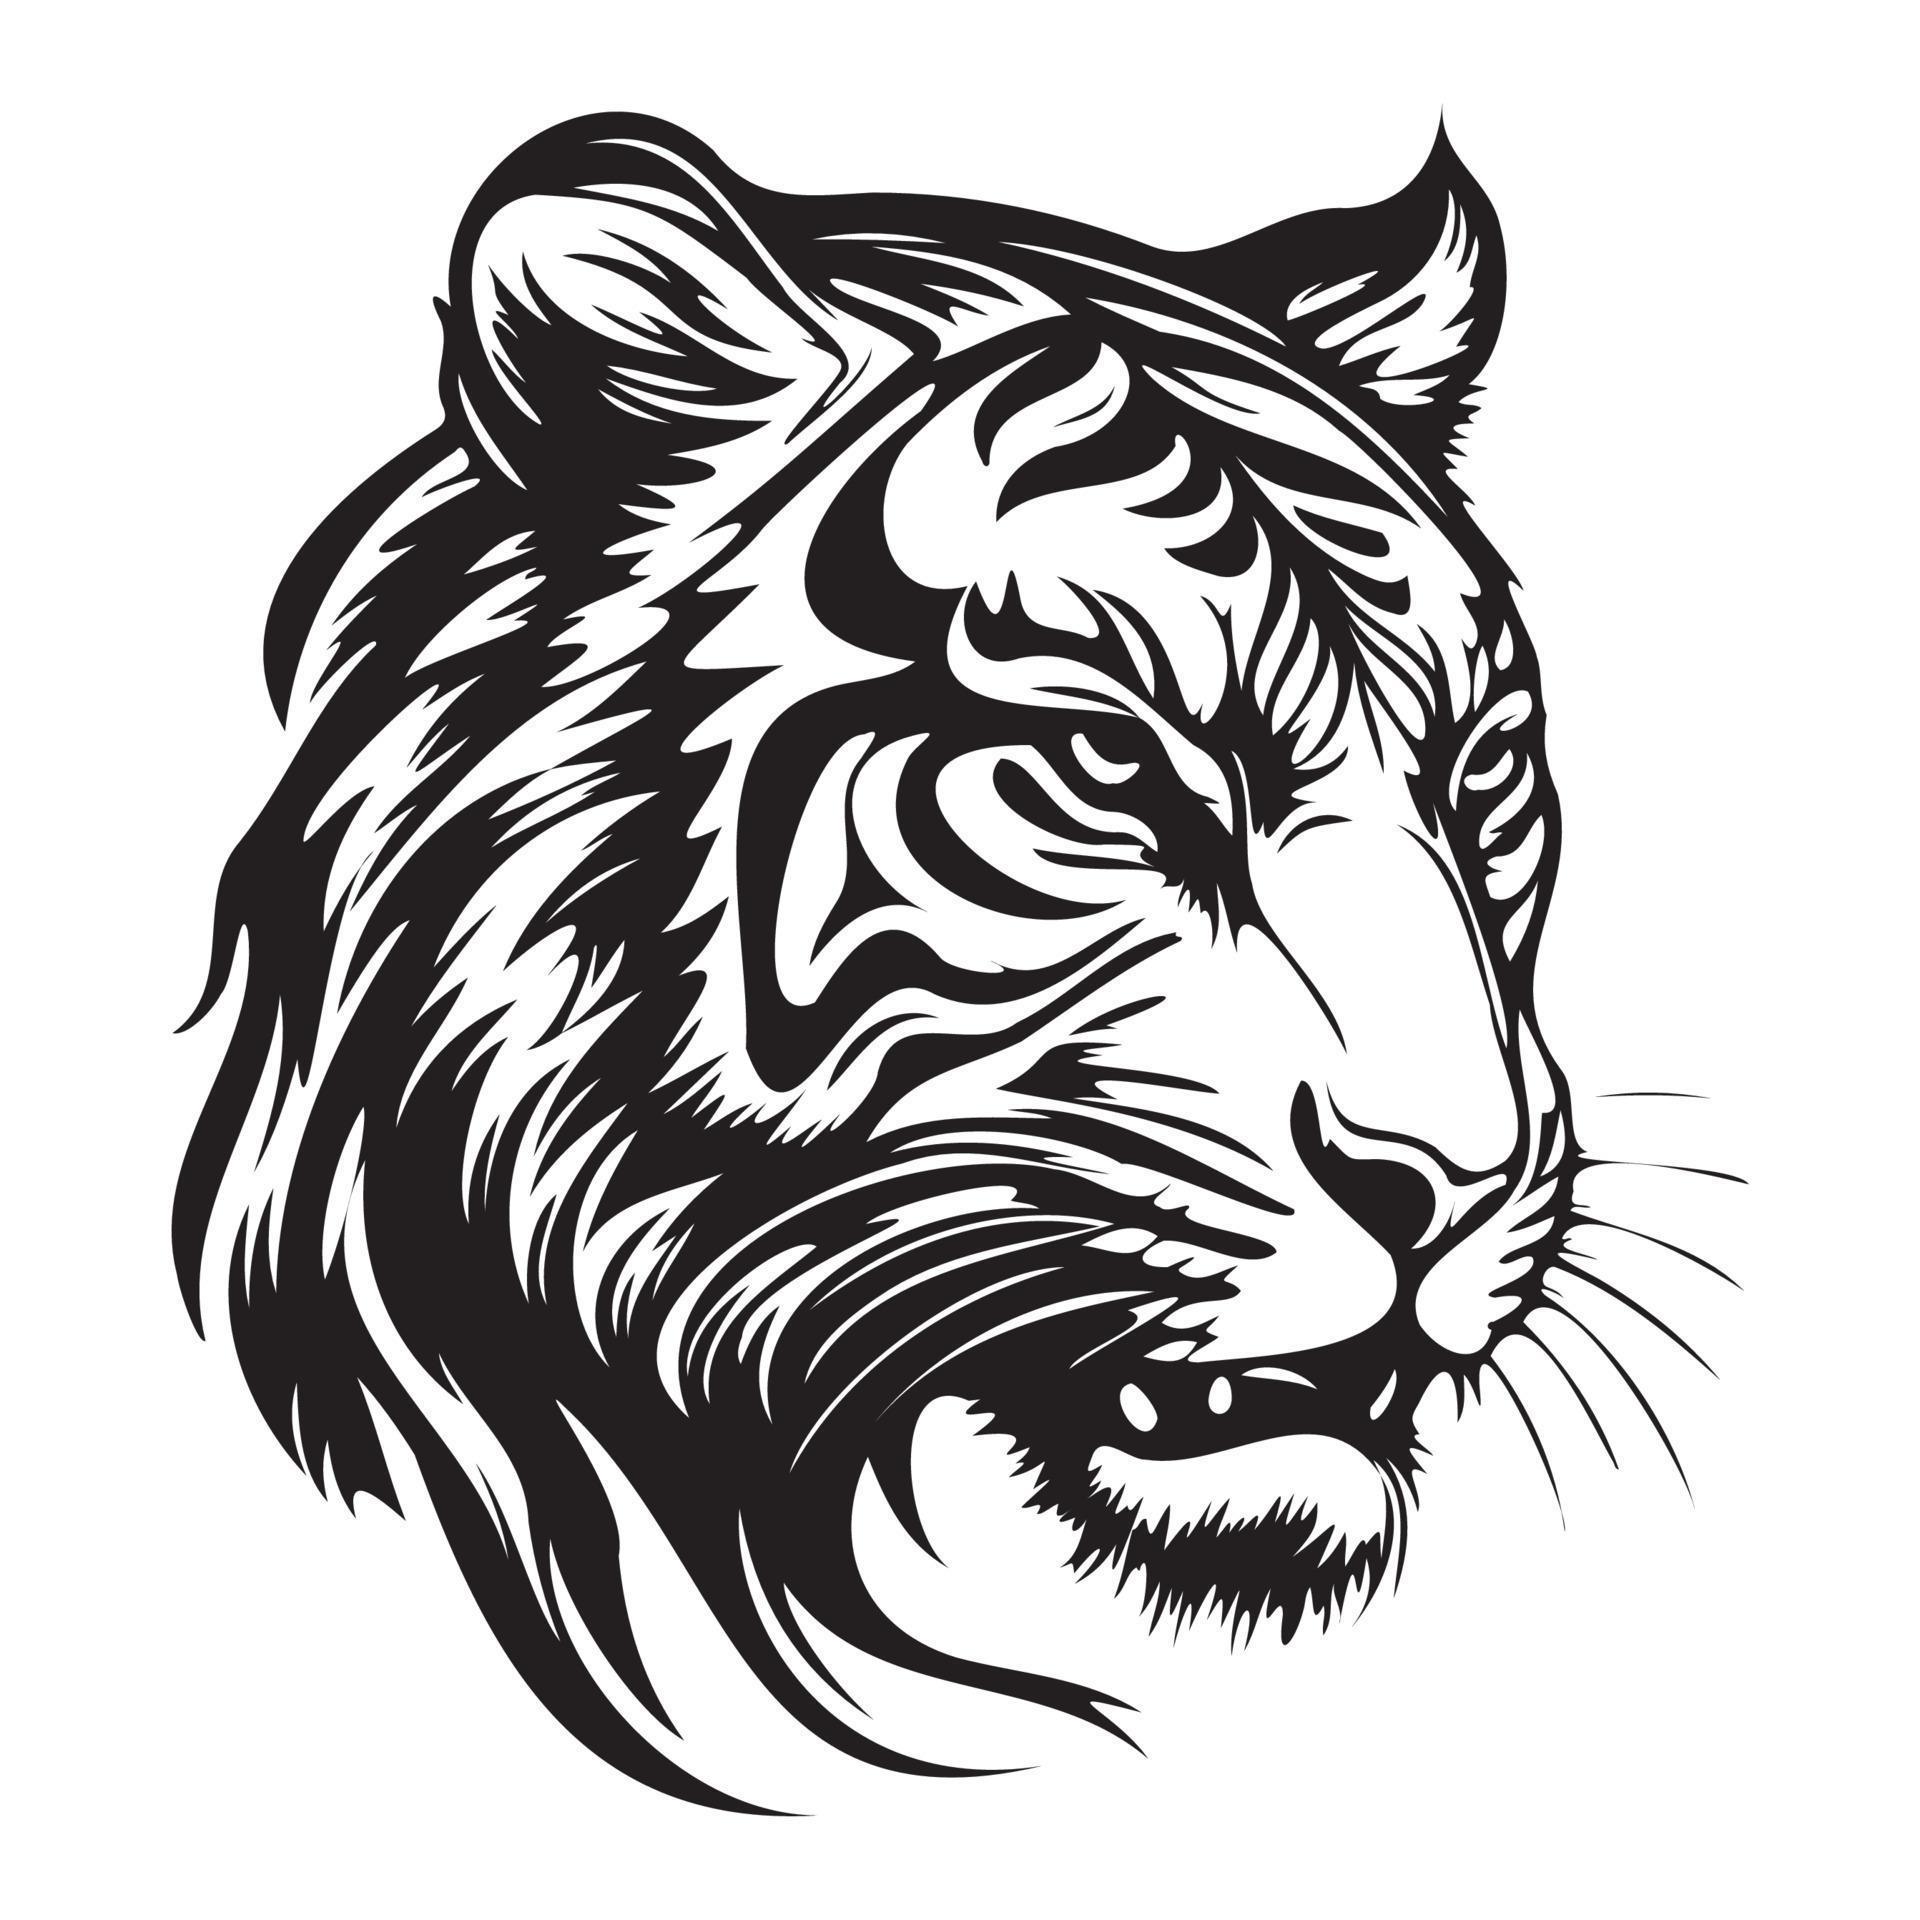 Tiger Face, Silhouettes Tiger Face SVG, black and white Tiger vector ...